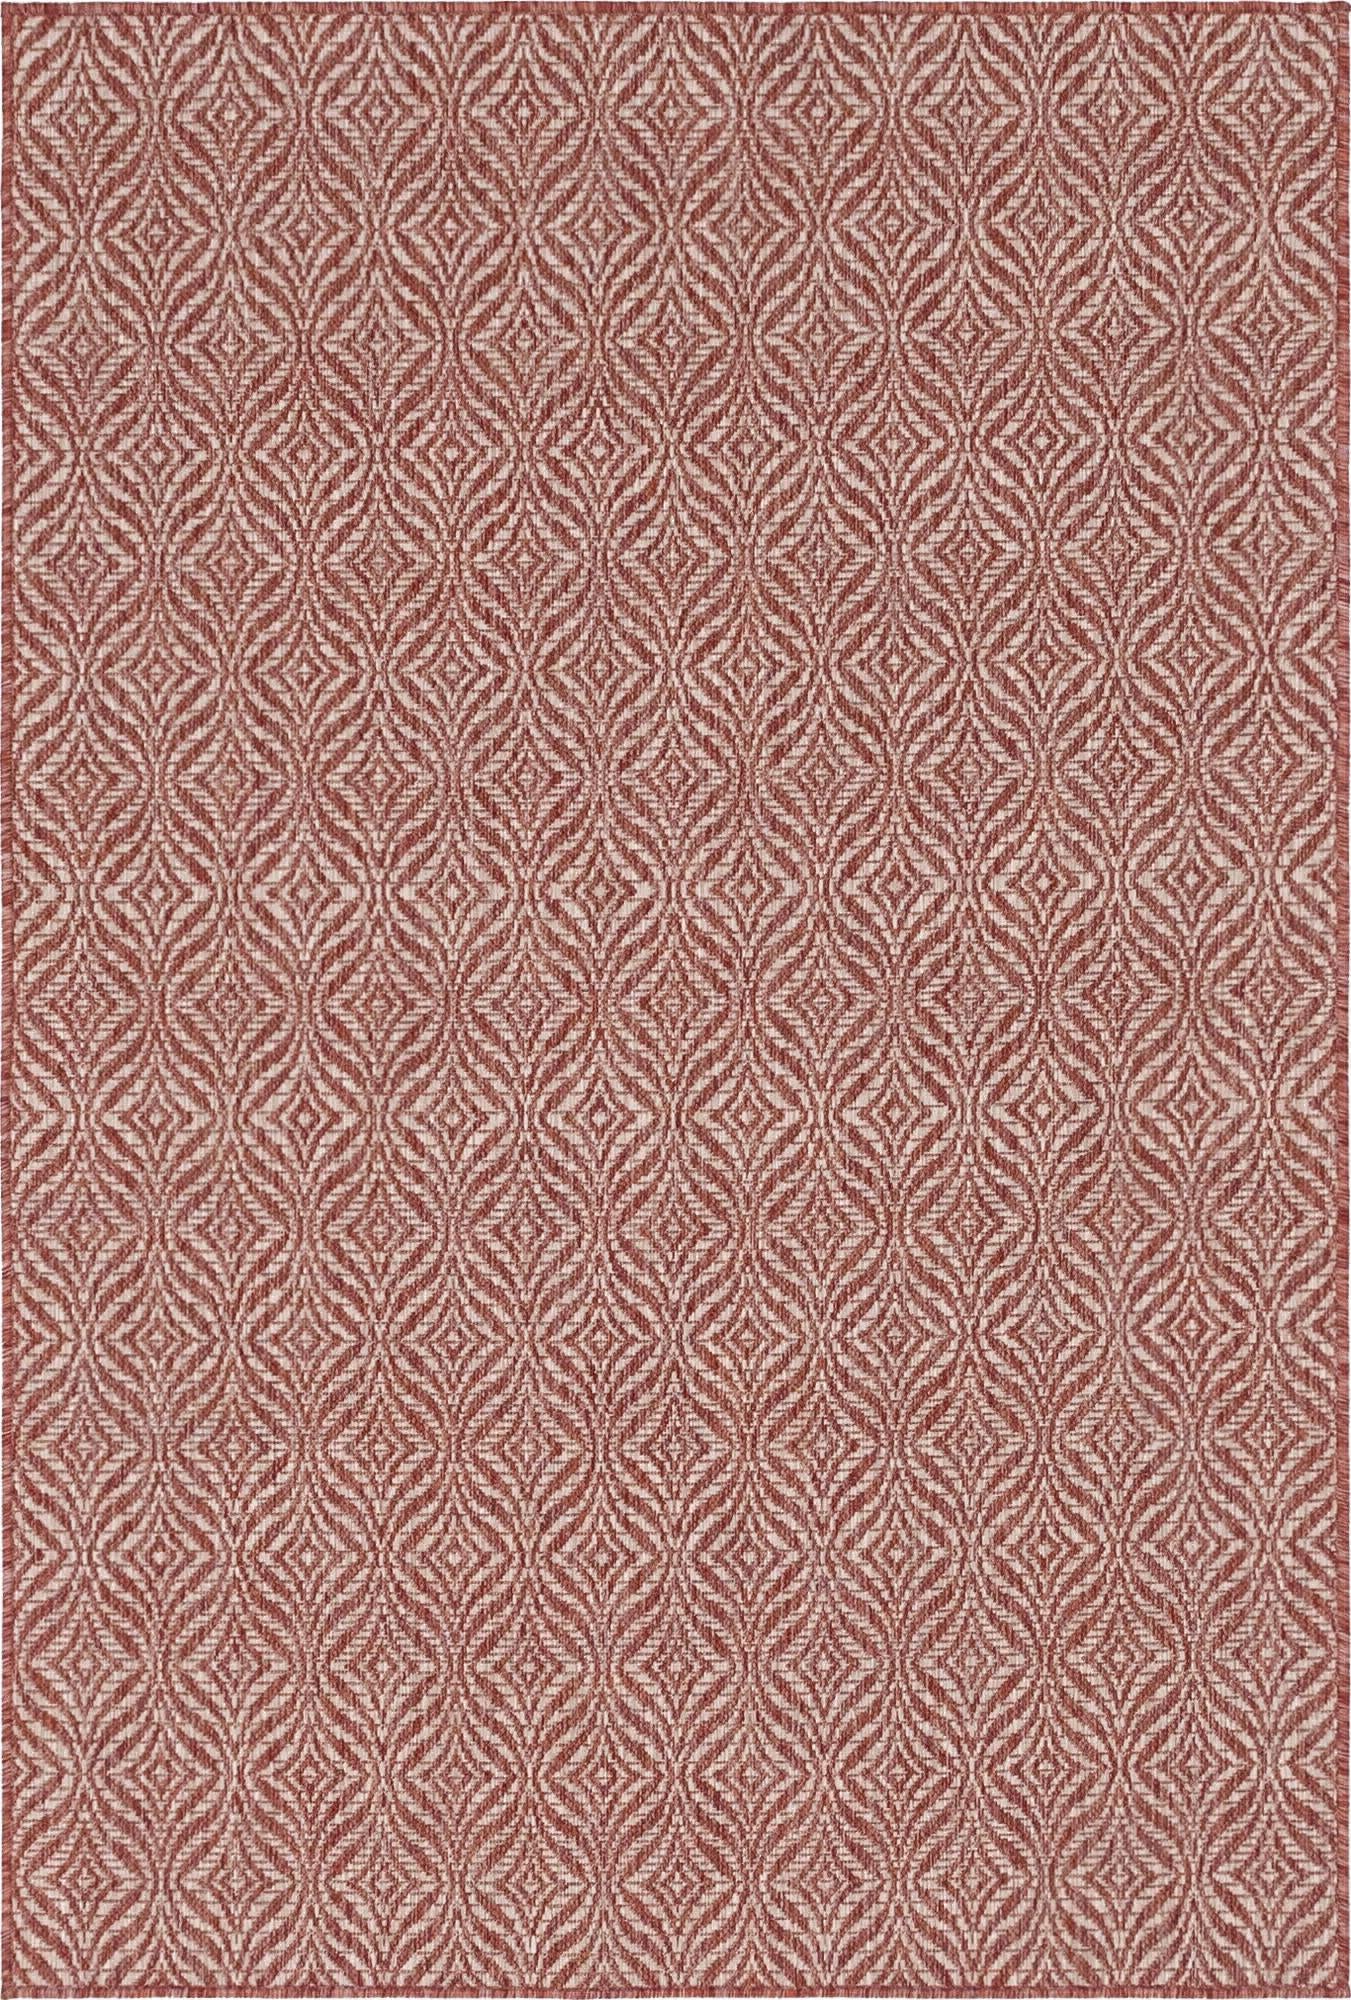 Unique Loom Outdoor Trellis T-KZOD15 Rust Red Area Rug main image